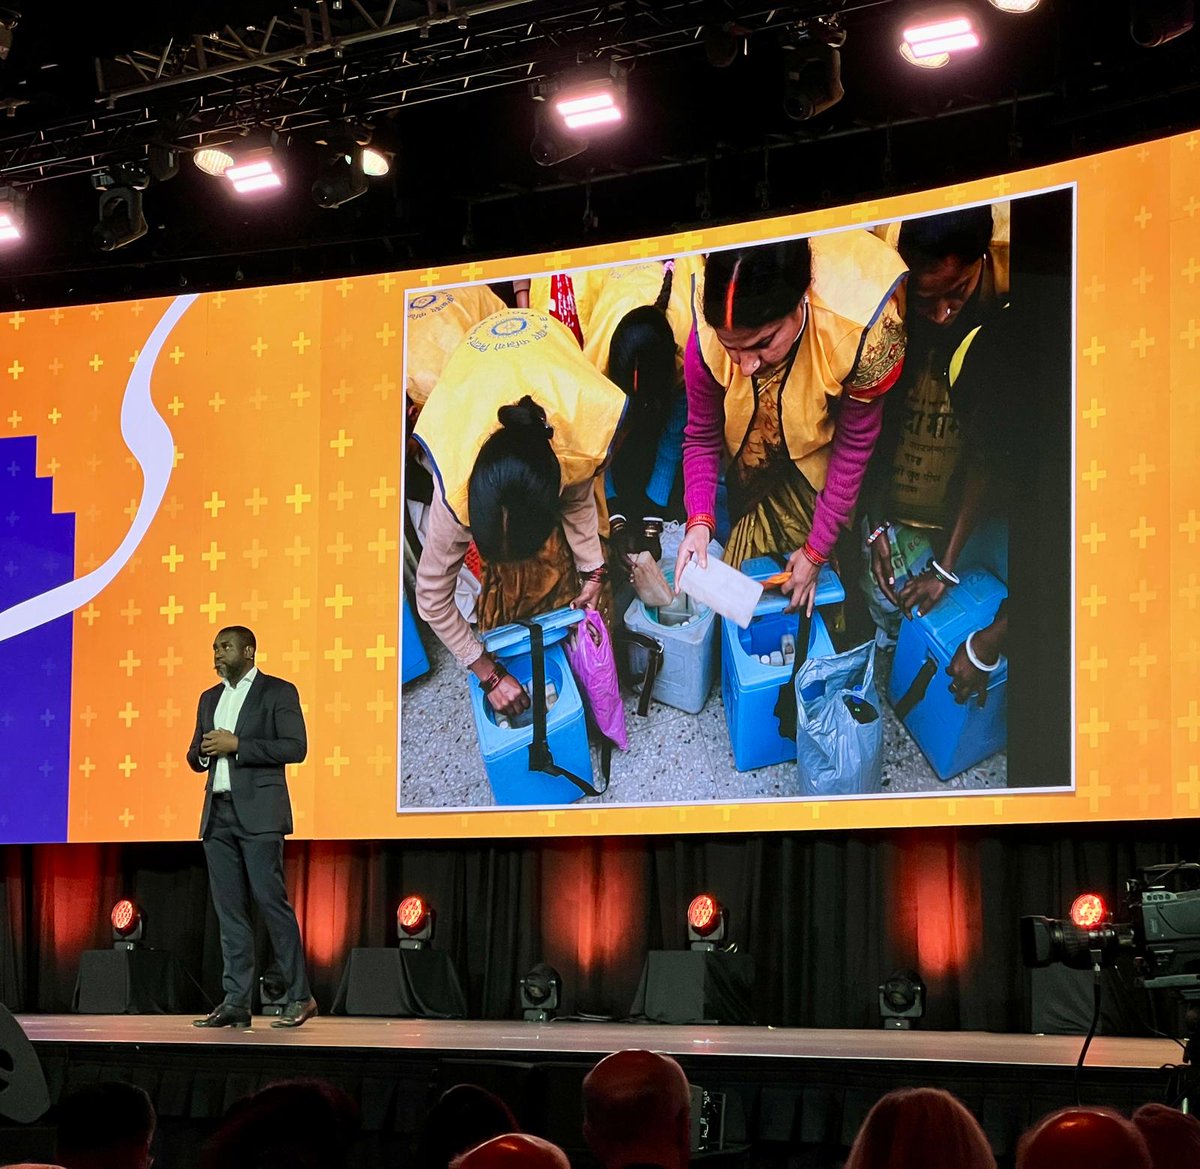 'Imagine a world where no child is paralyzed by polio and no child's dreams are cut
short by malaria. Imagine the possibilities when everyone has a chance. That future isn't out of reach, not when we work together.' 🤝 Thanks @obinnaonyekwena @gatesfoundation #Rotary24